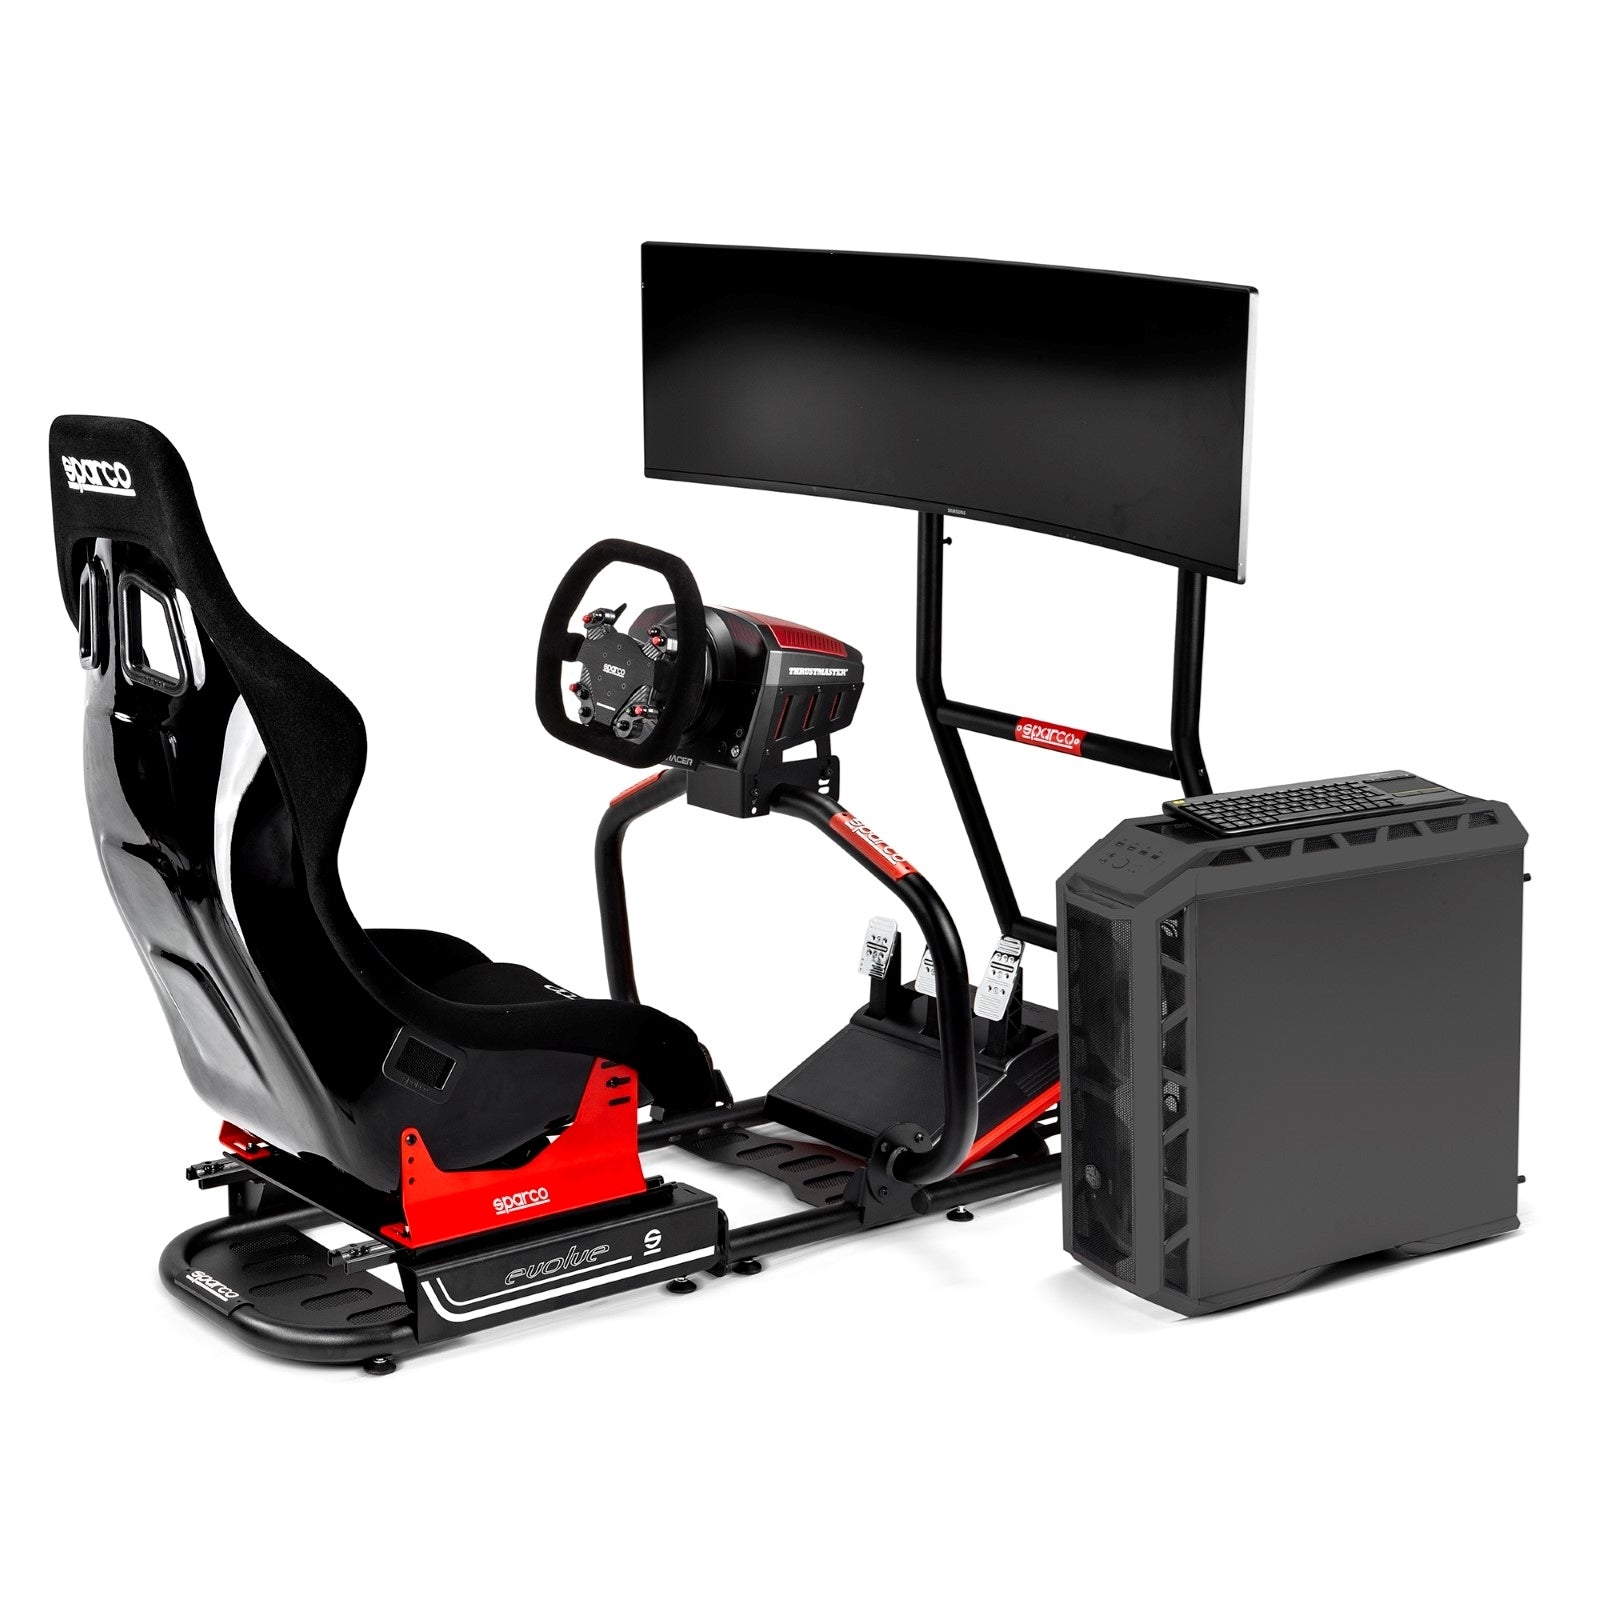 Haut-parleurs 2.1 Sparco Pro Gaming - Gt2i